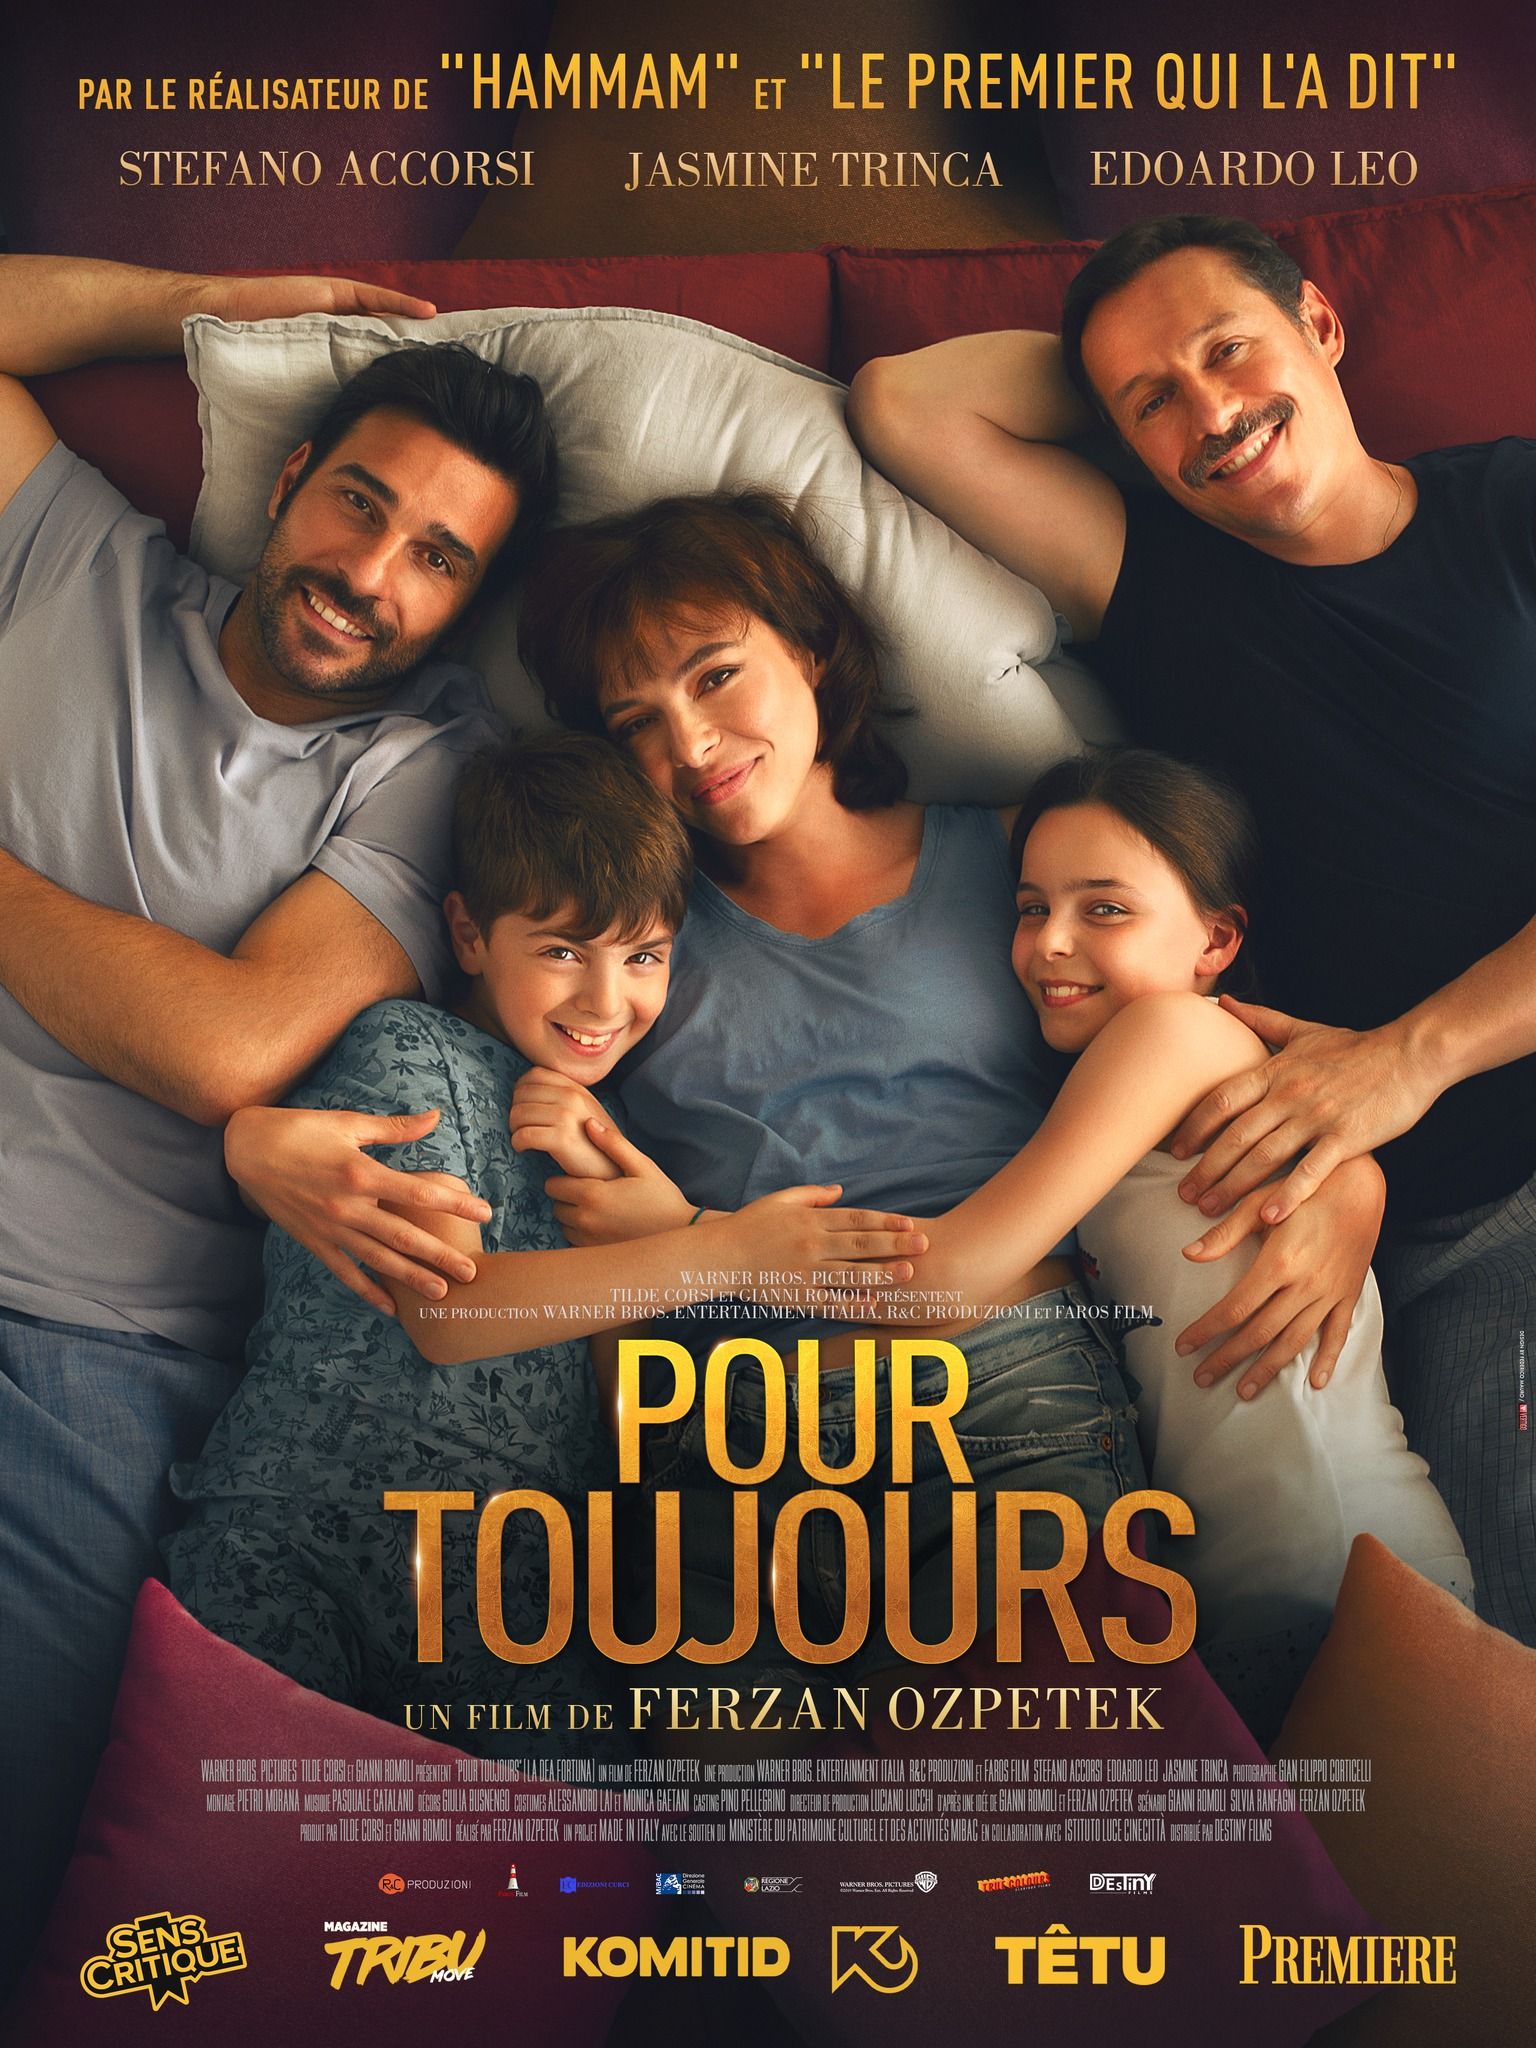 Pour Toujours - Film (2019) streaming VF gratuit complet